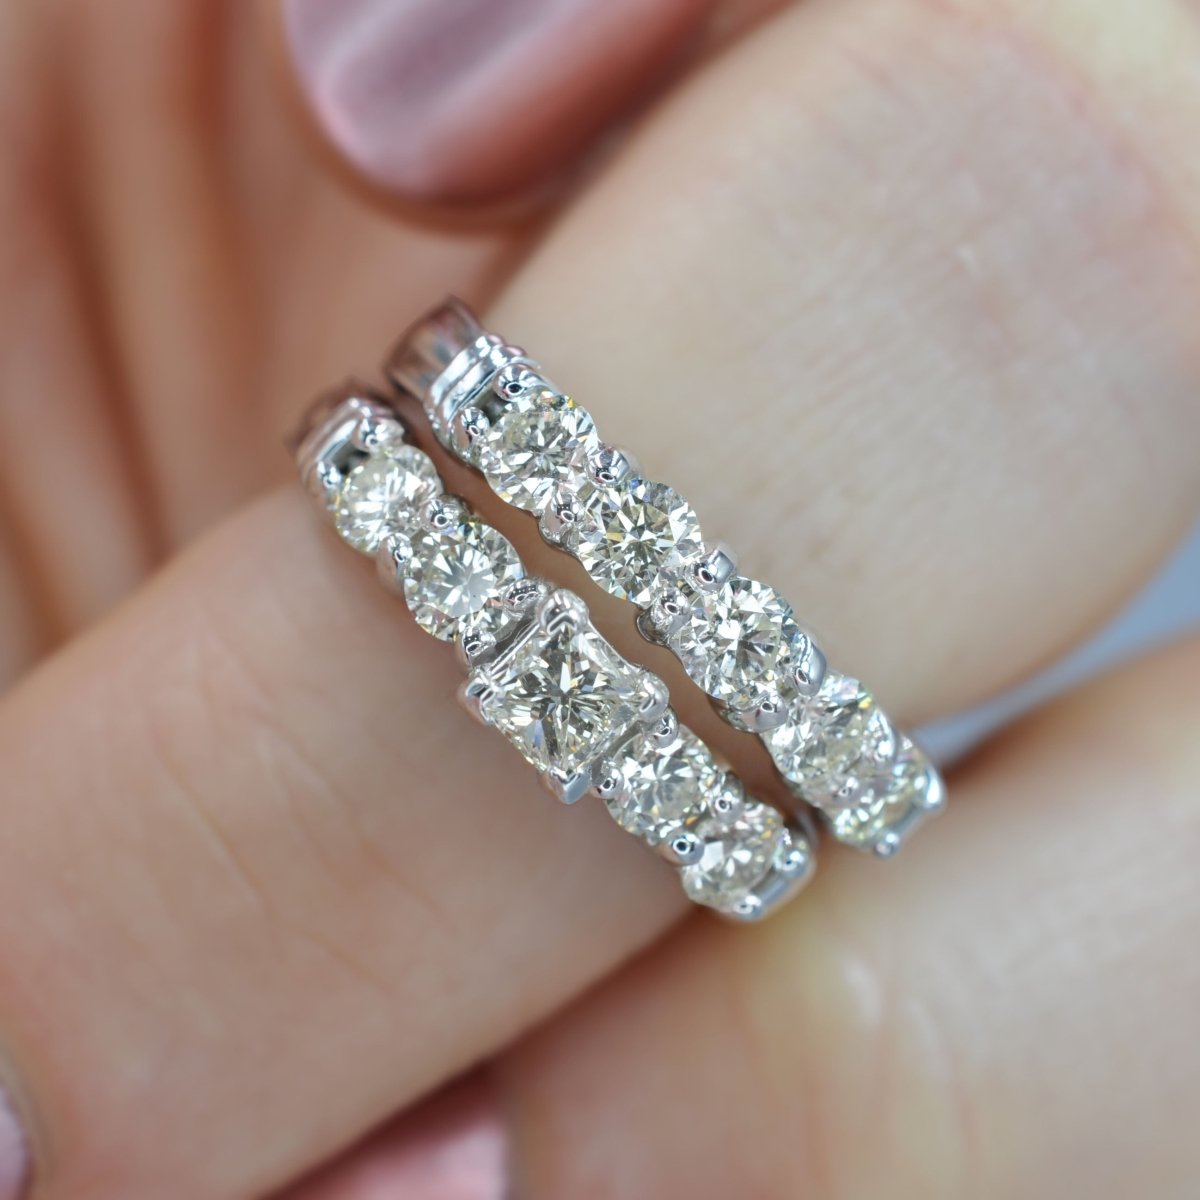 Cost-Effective 1.55CT Princess and Round Cut Diamond Bridal Set in 14KT White Gold - Primestyle.com